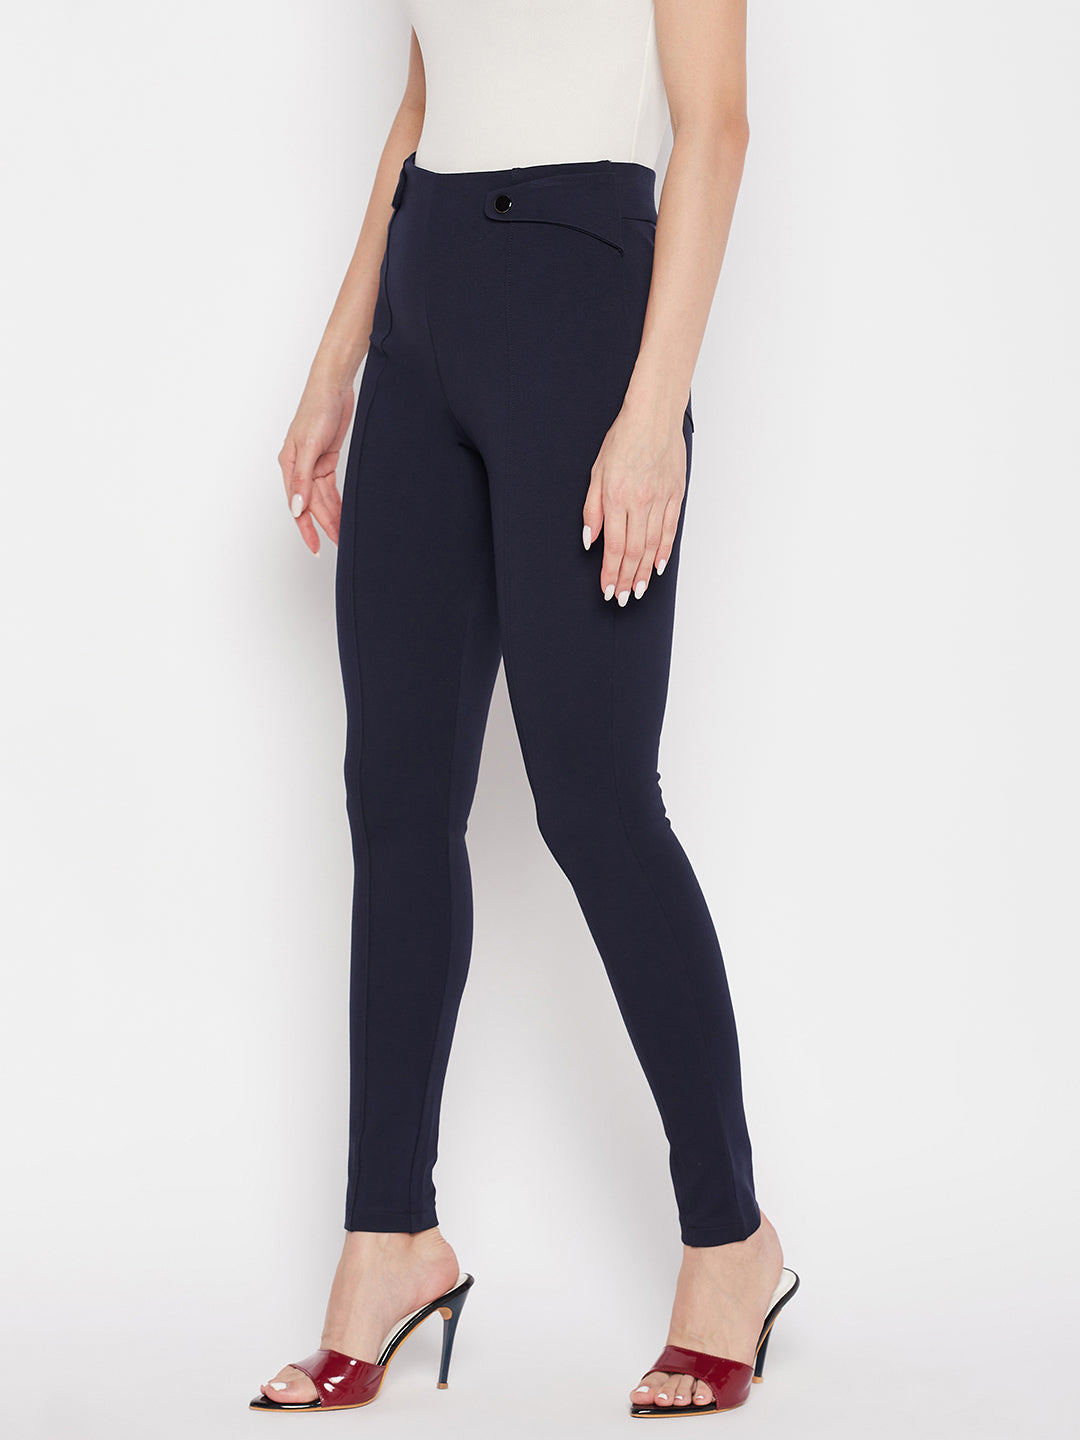 Clora Navy Blue Solid Relaxed Fit Jeggings